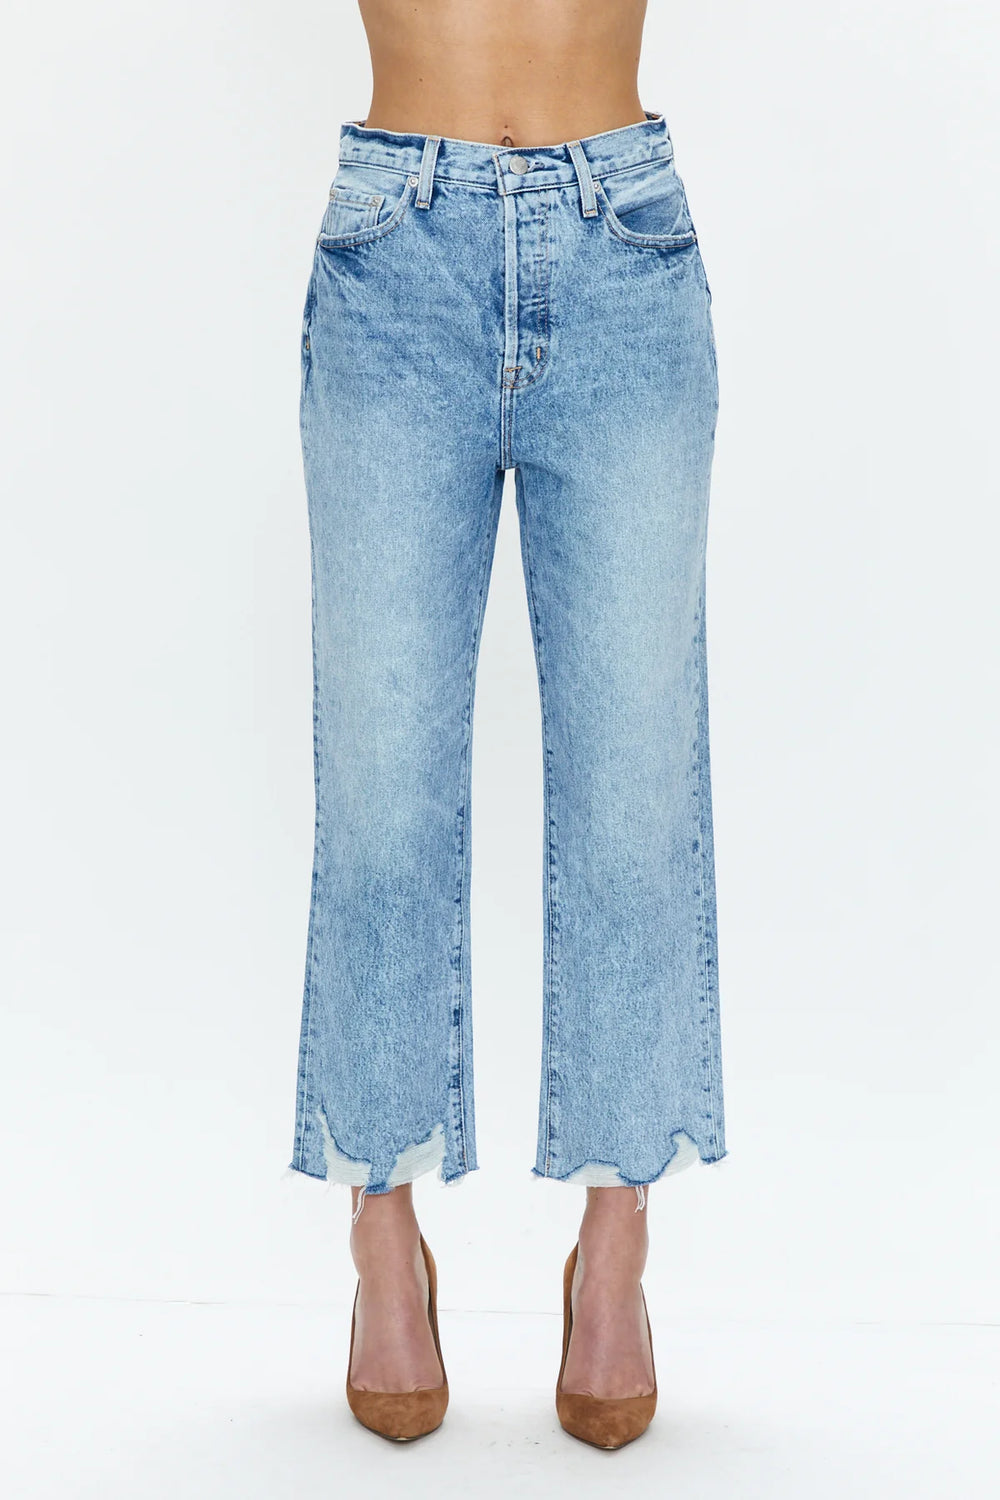 Cassie High Rise Straight Crop Jeans in Baja - Madison&